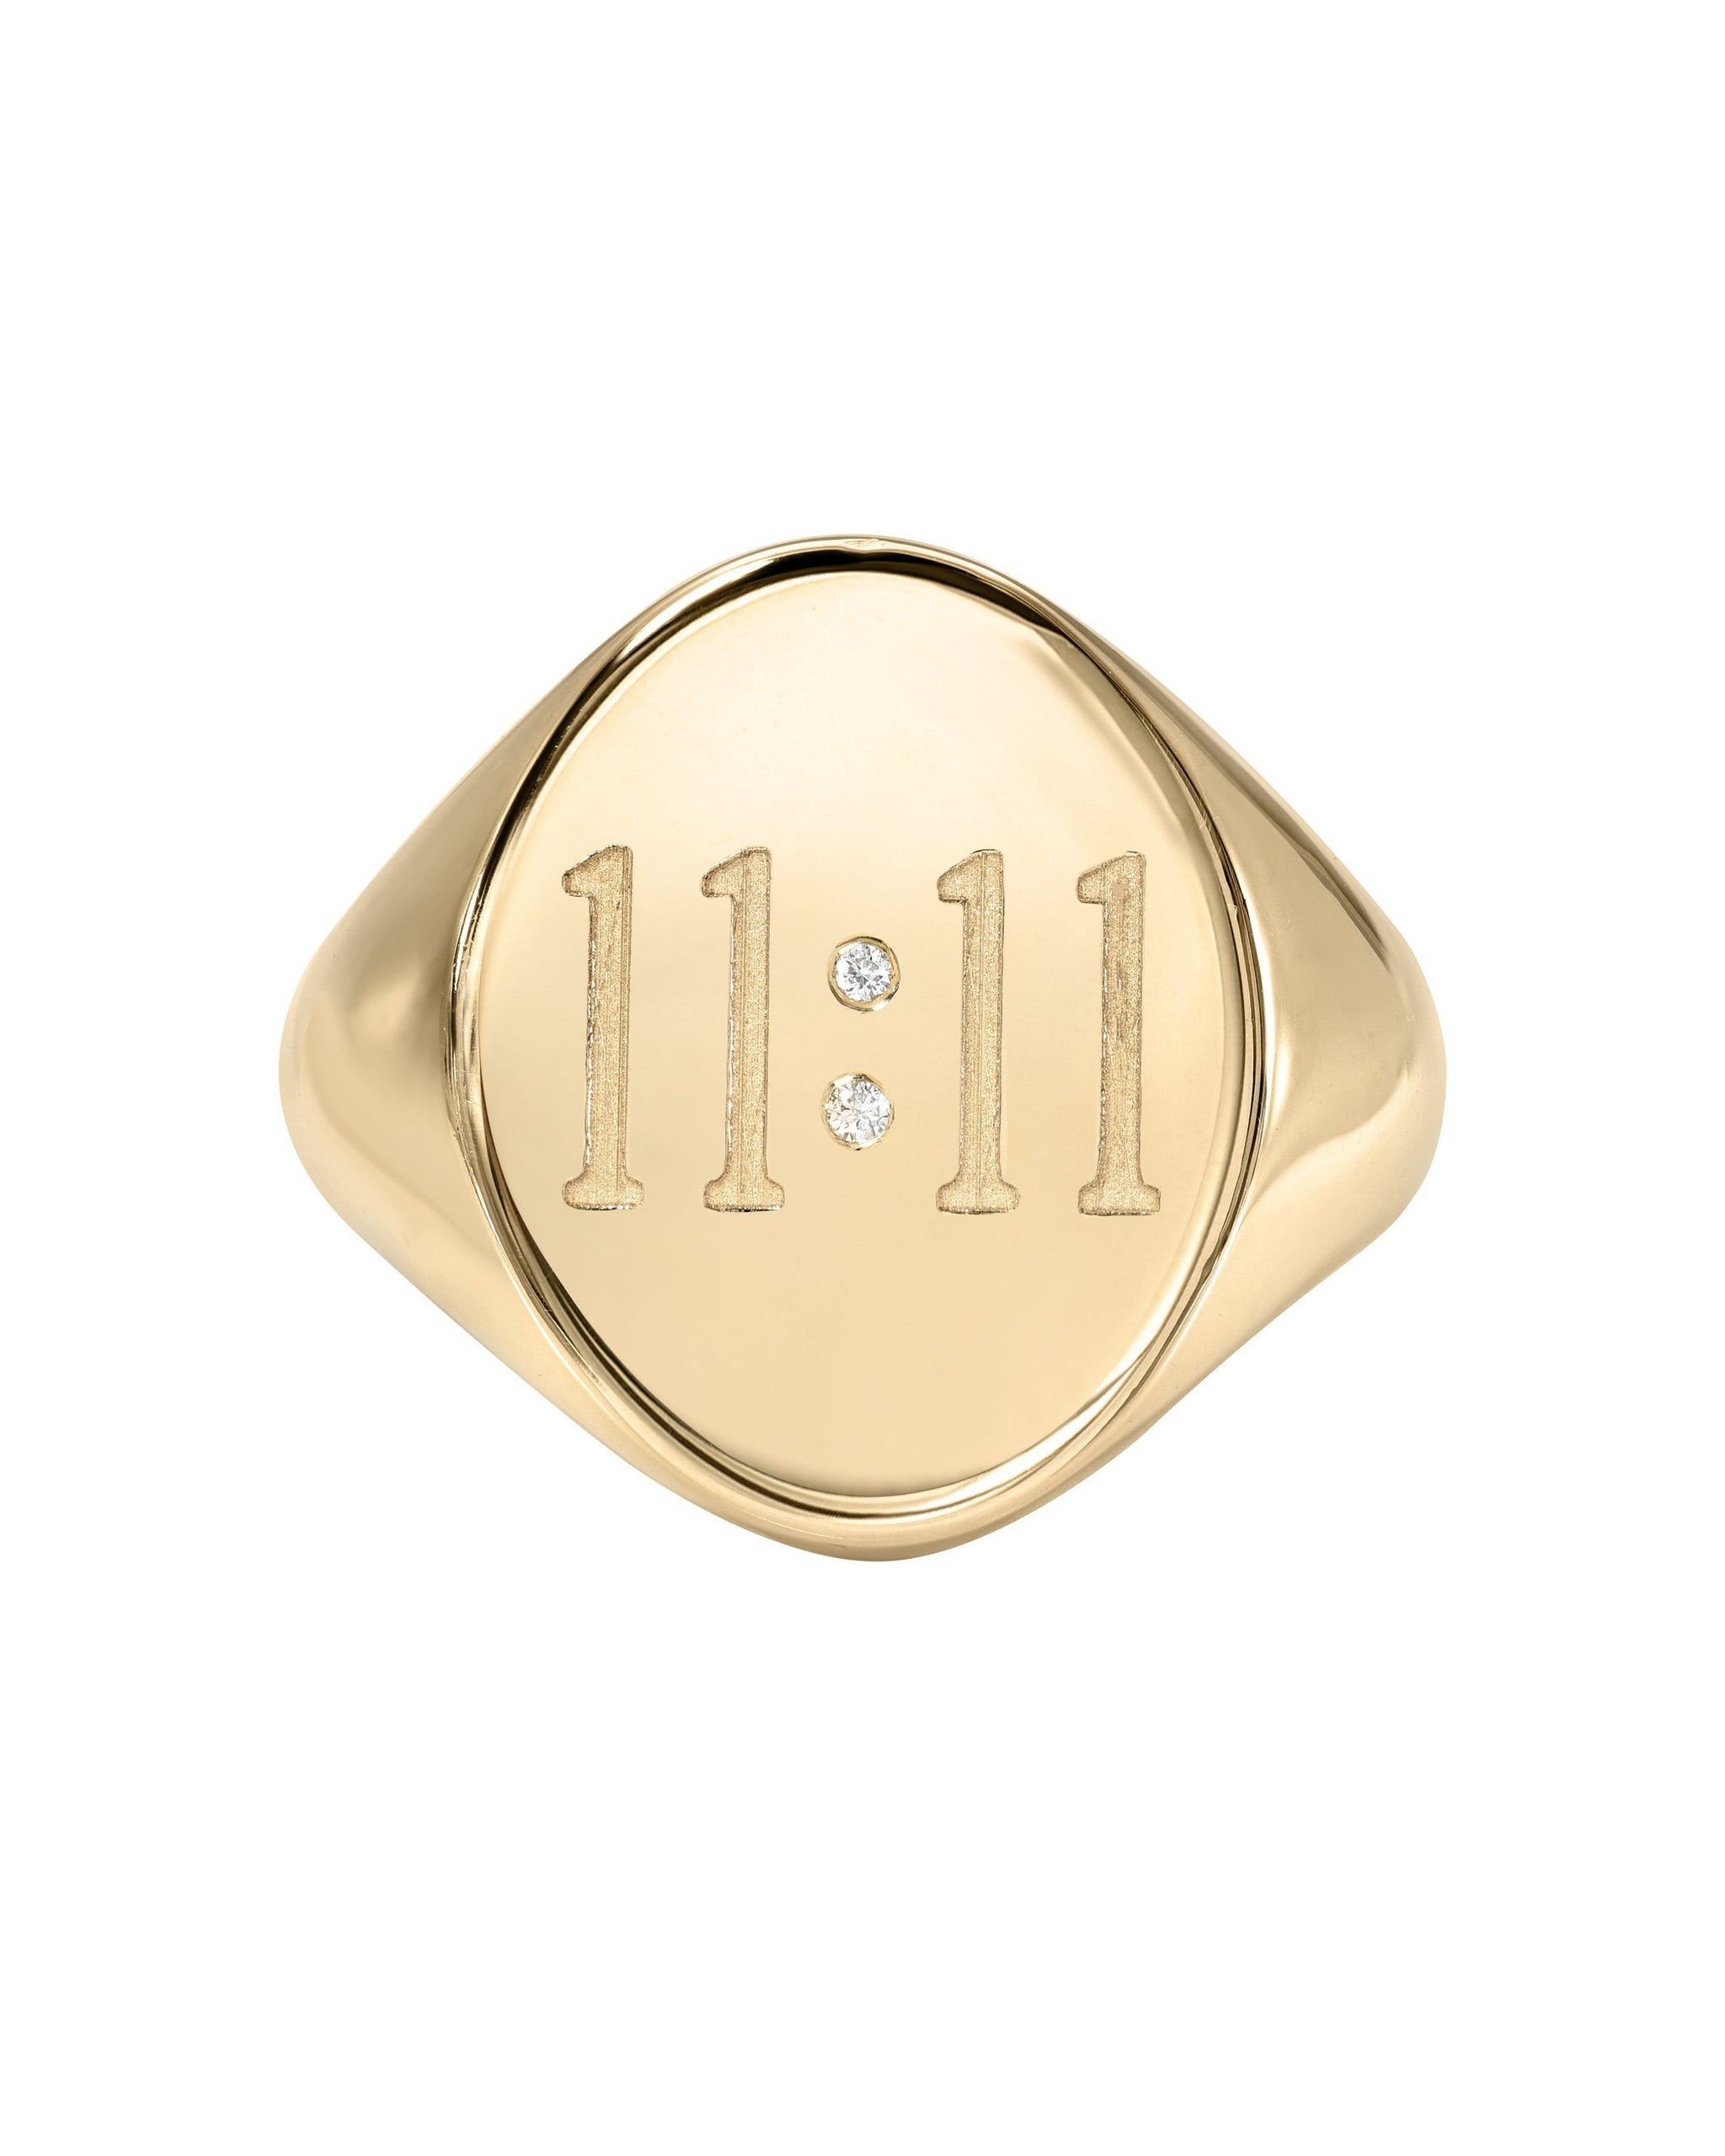 11:11 Make a wish ring, diamond and 14k gold signet ring, handmade by Turquoise and Tobacco in Los Angeles, California